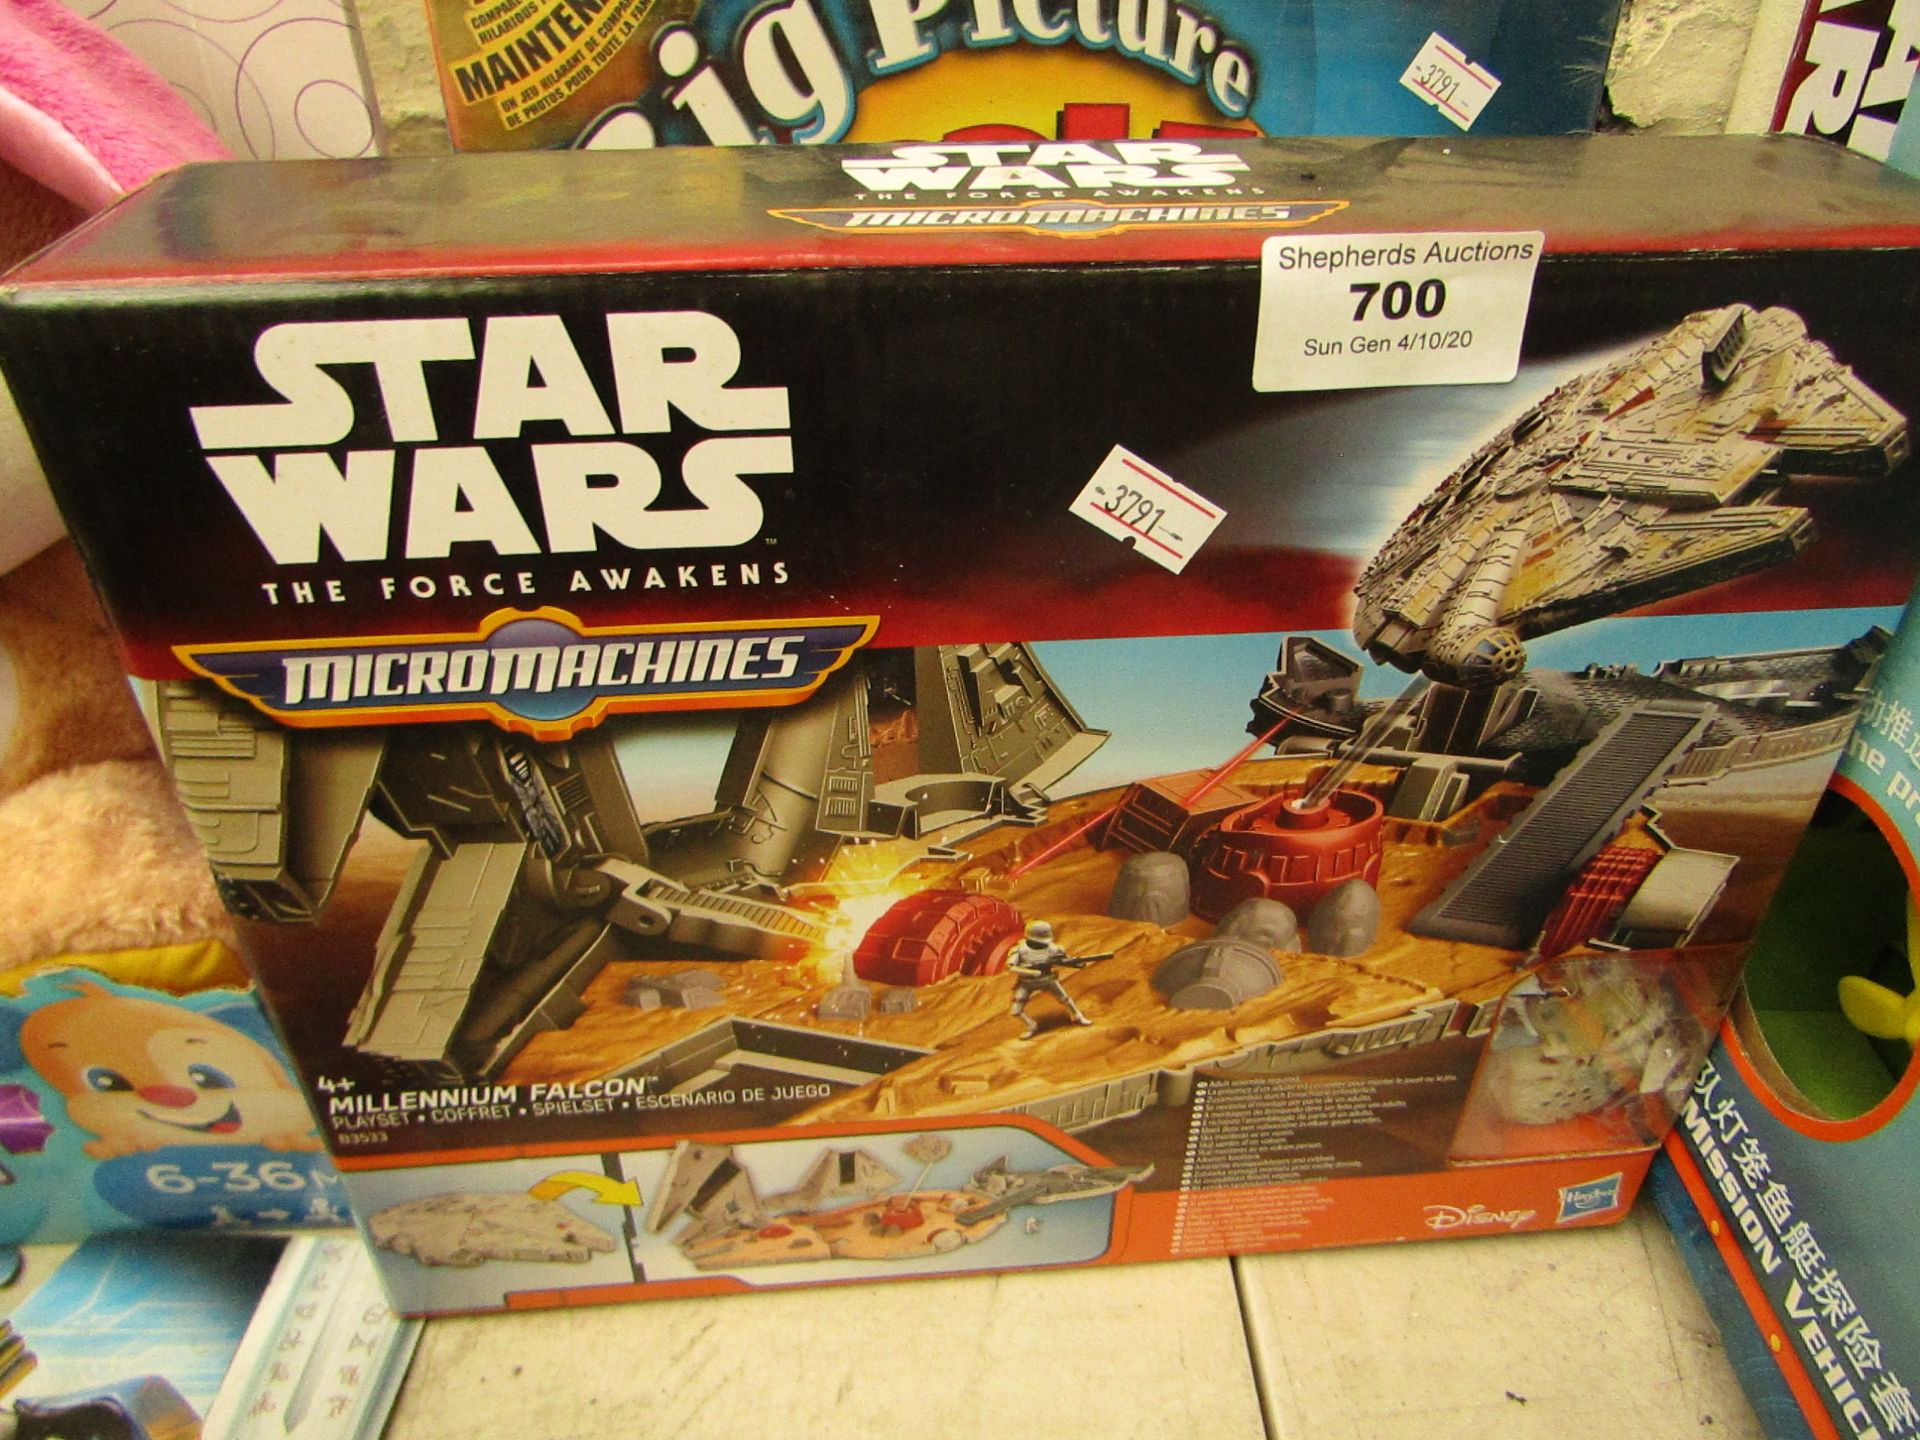 Star wars the Force Awakens Micro Machines Millennium falcon play set, look s unsued nad in